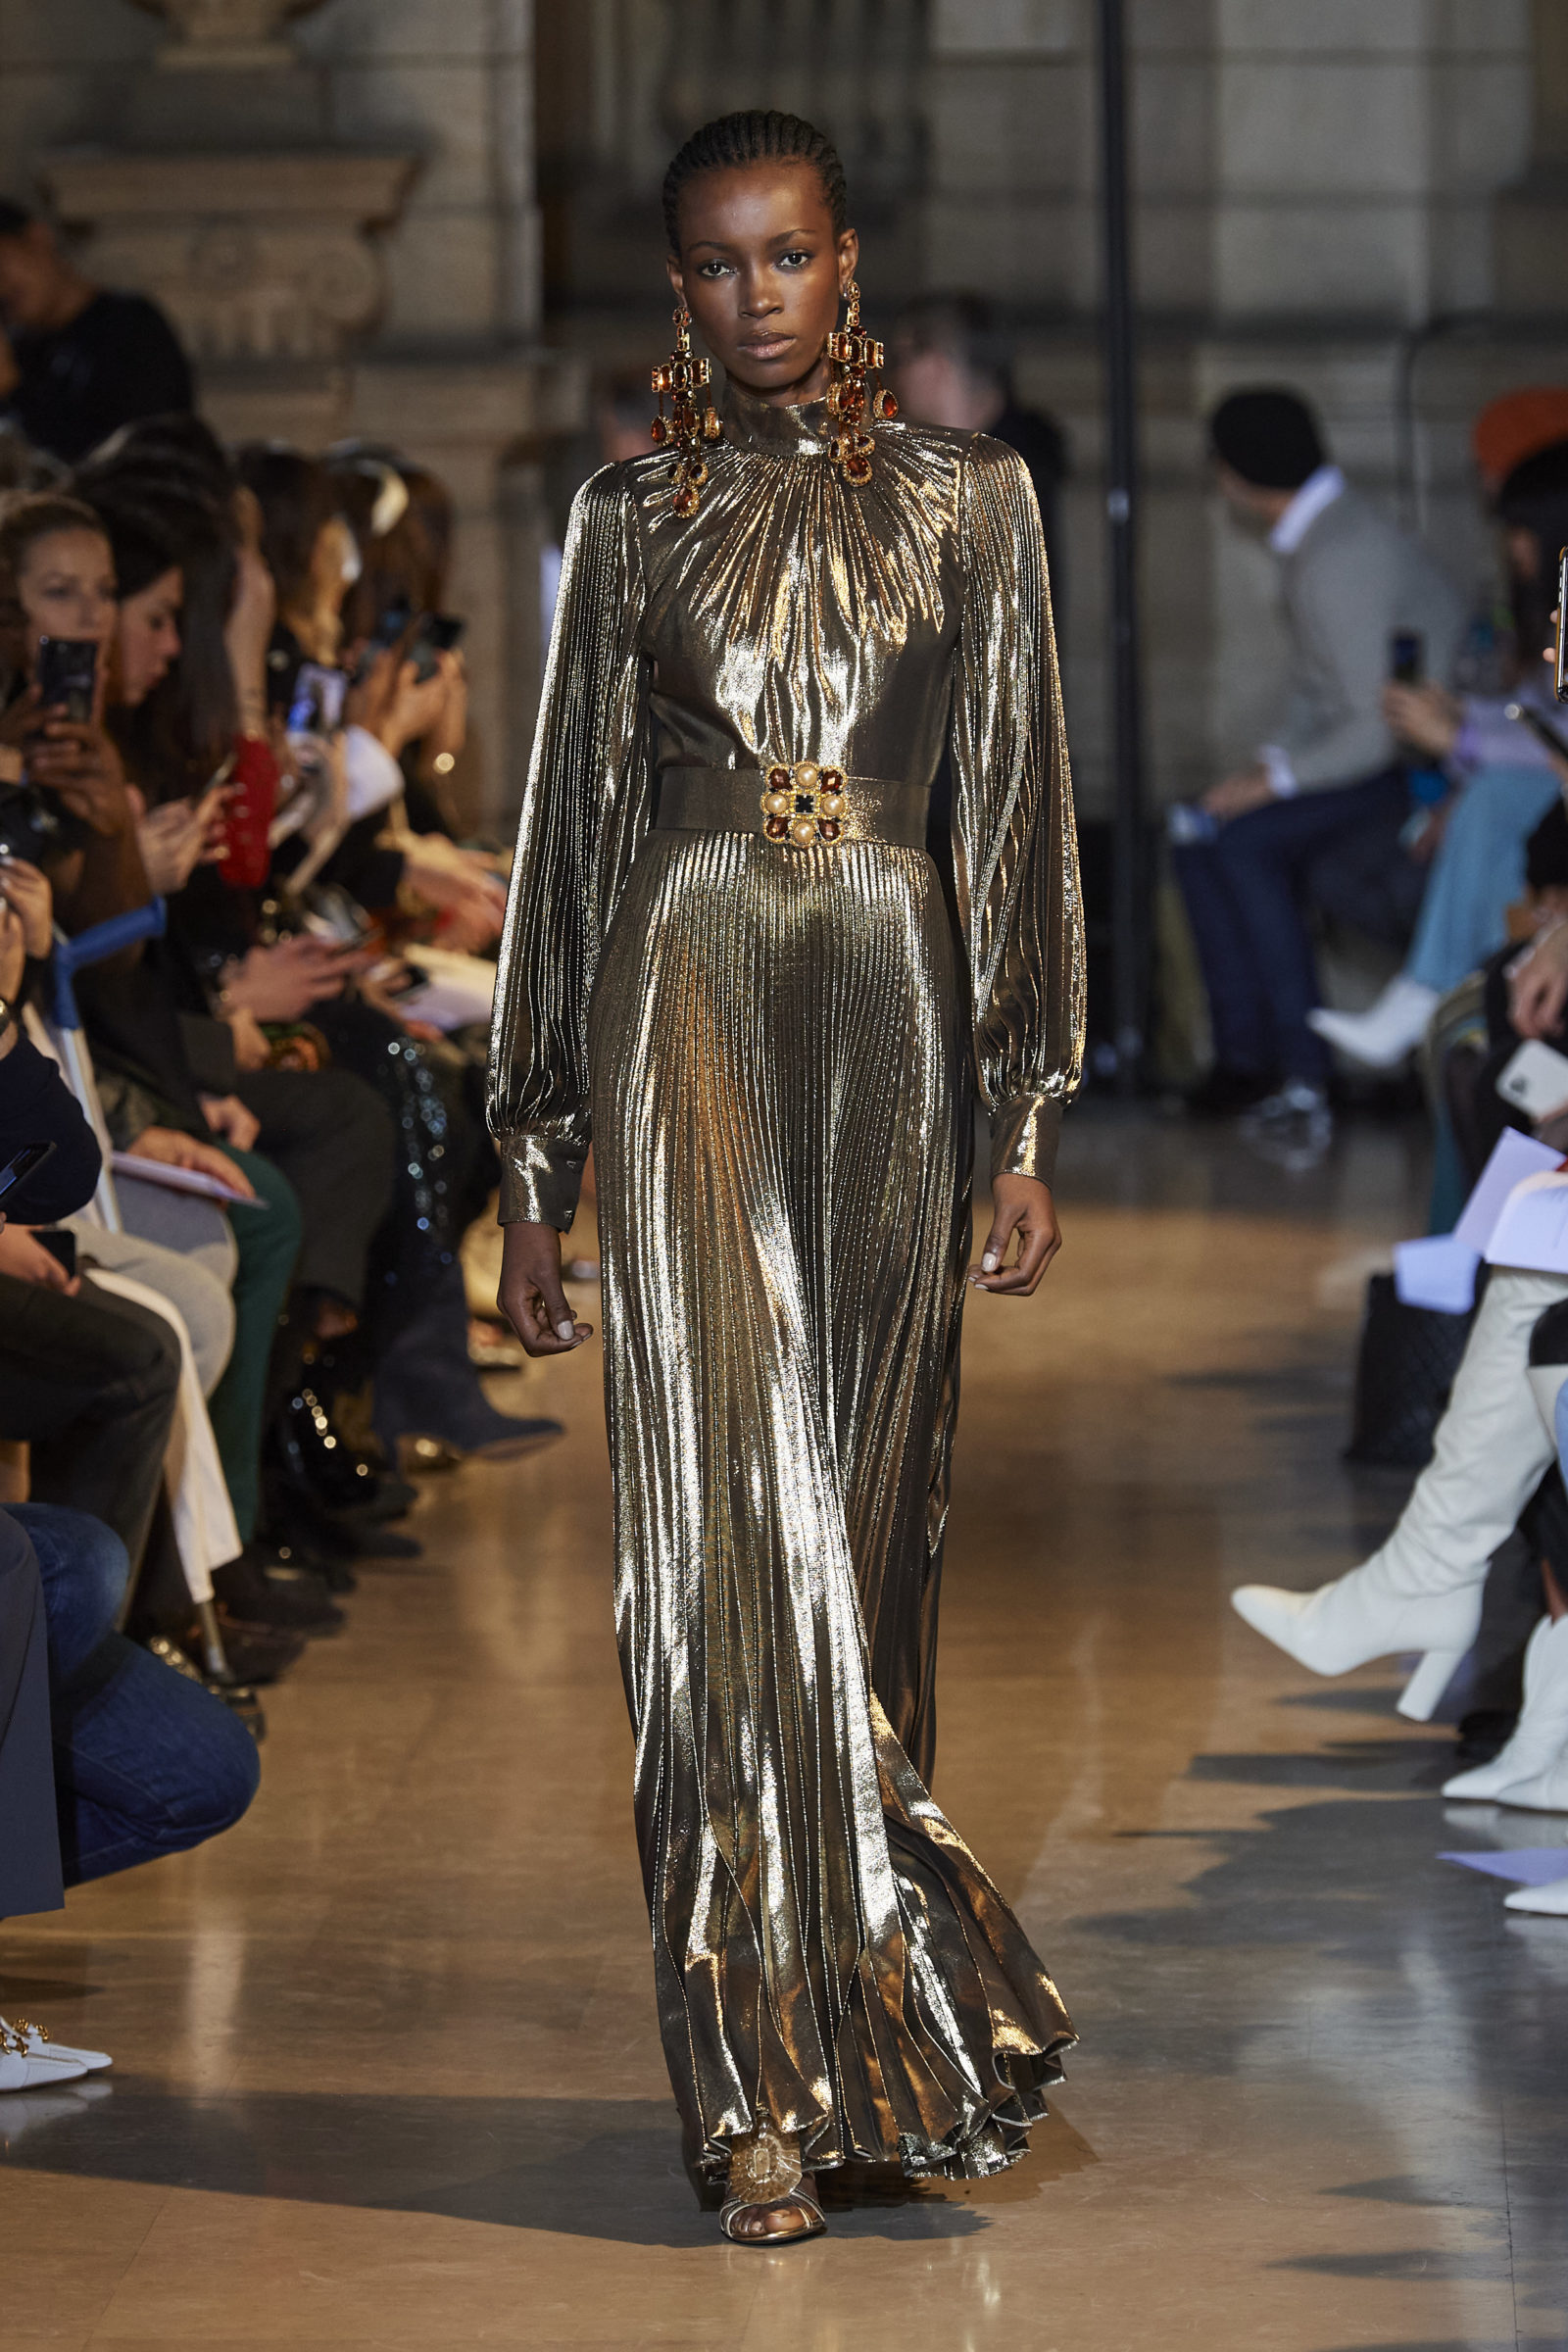 Paris Fashion Week Trends to Know From Fall 2020 - FASHION Magazine